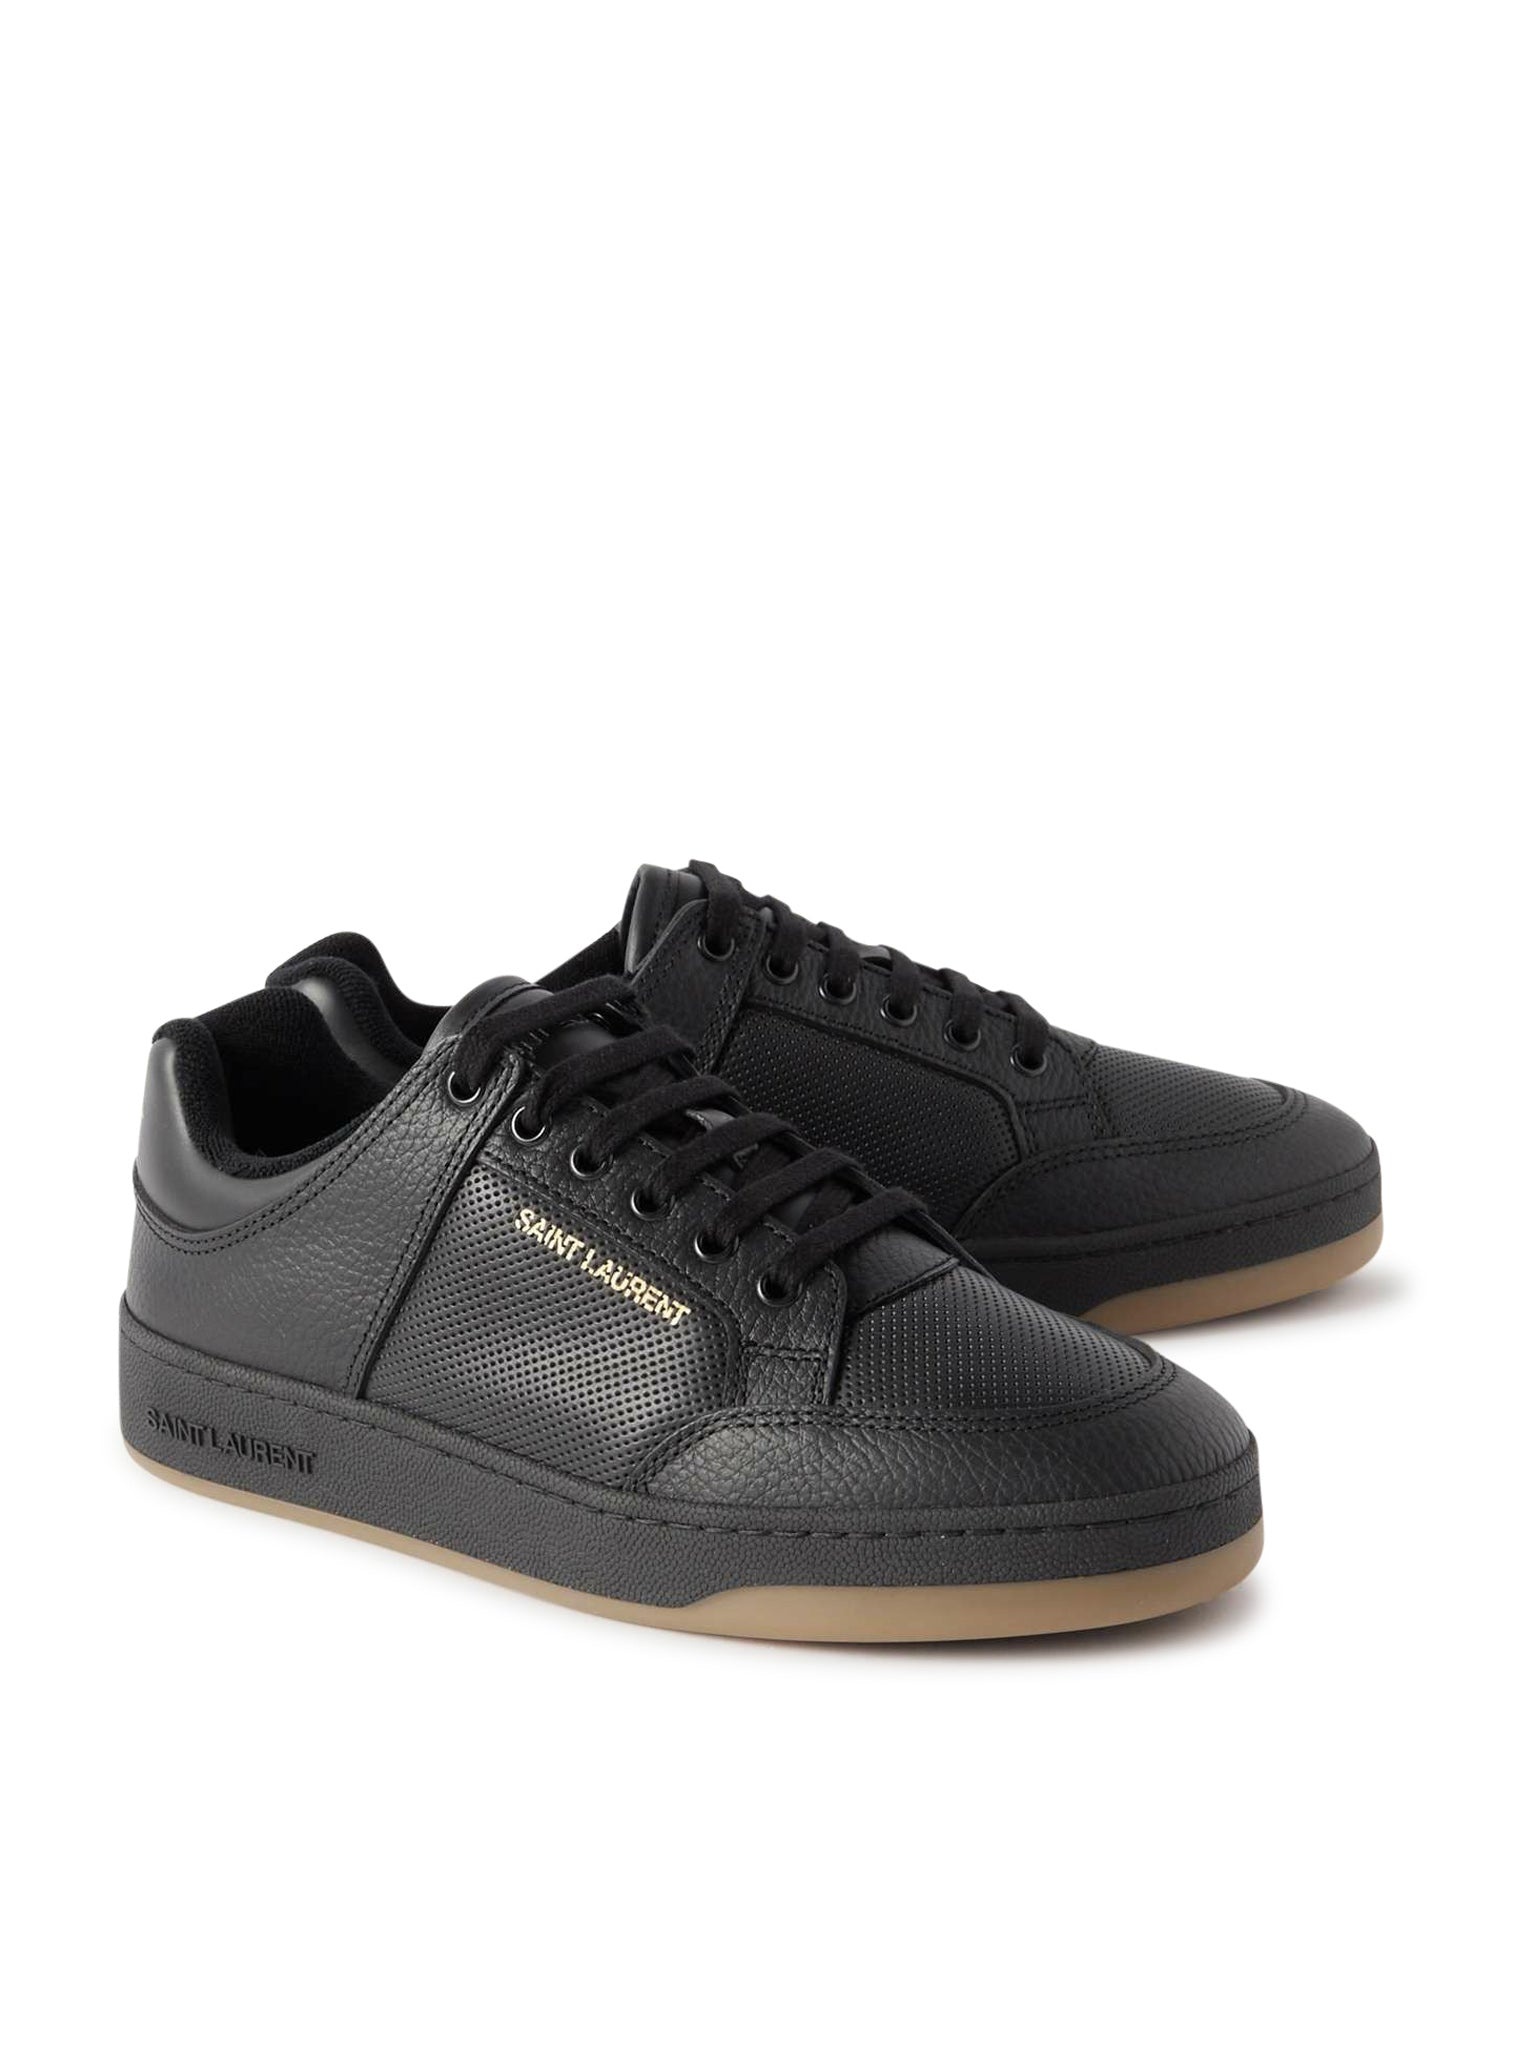 SL/61 PERFORATED LEATHER SNEAKERS - 3